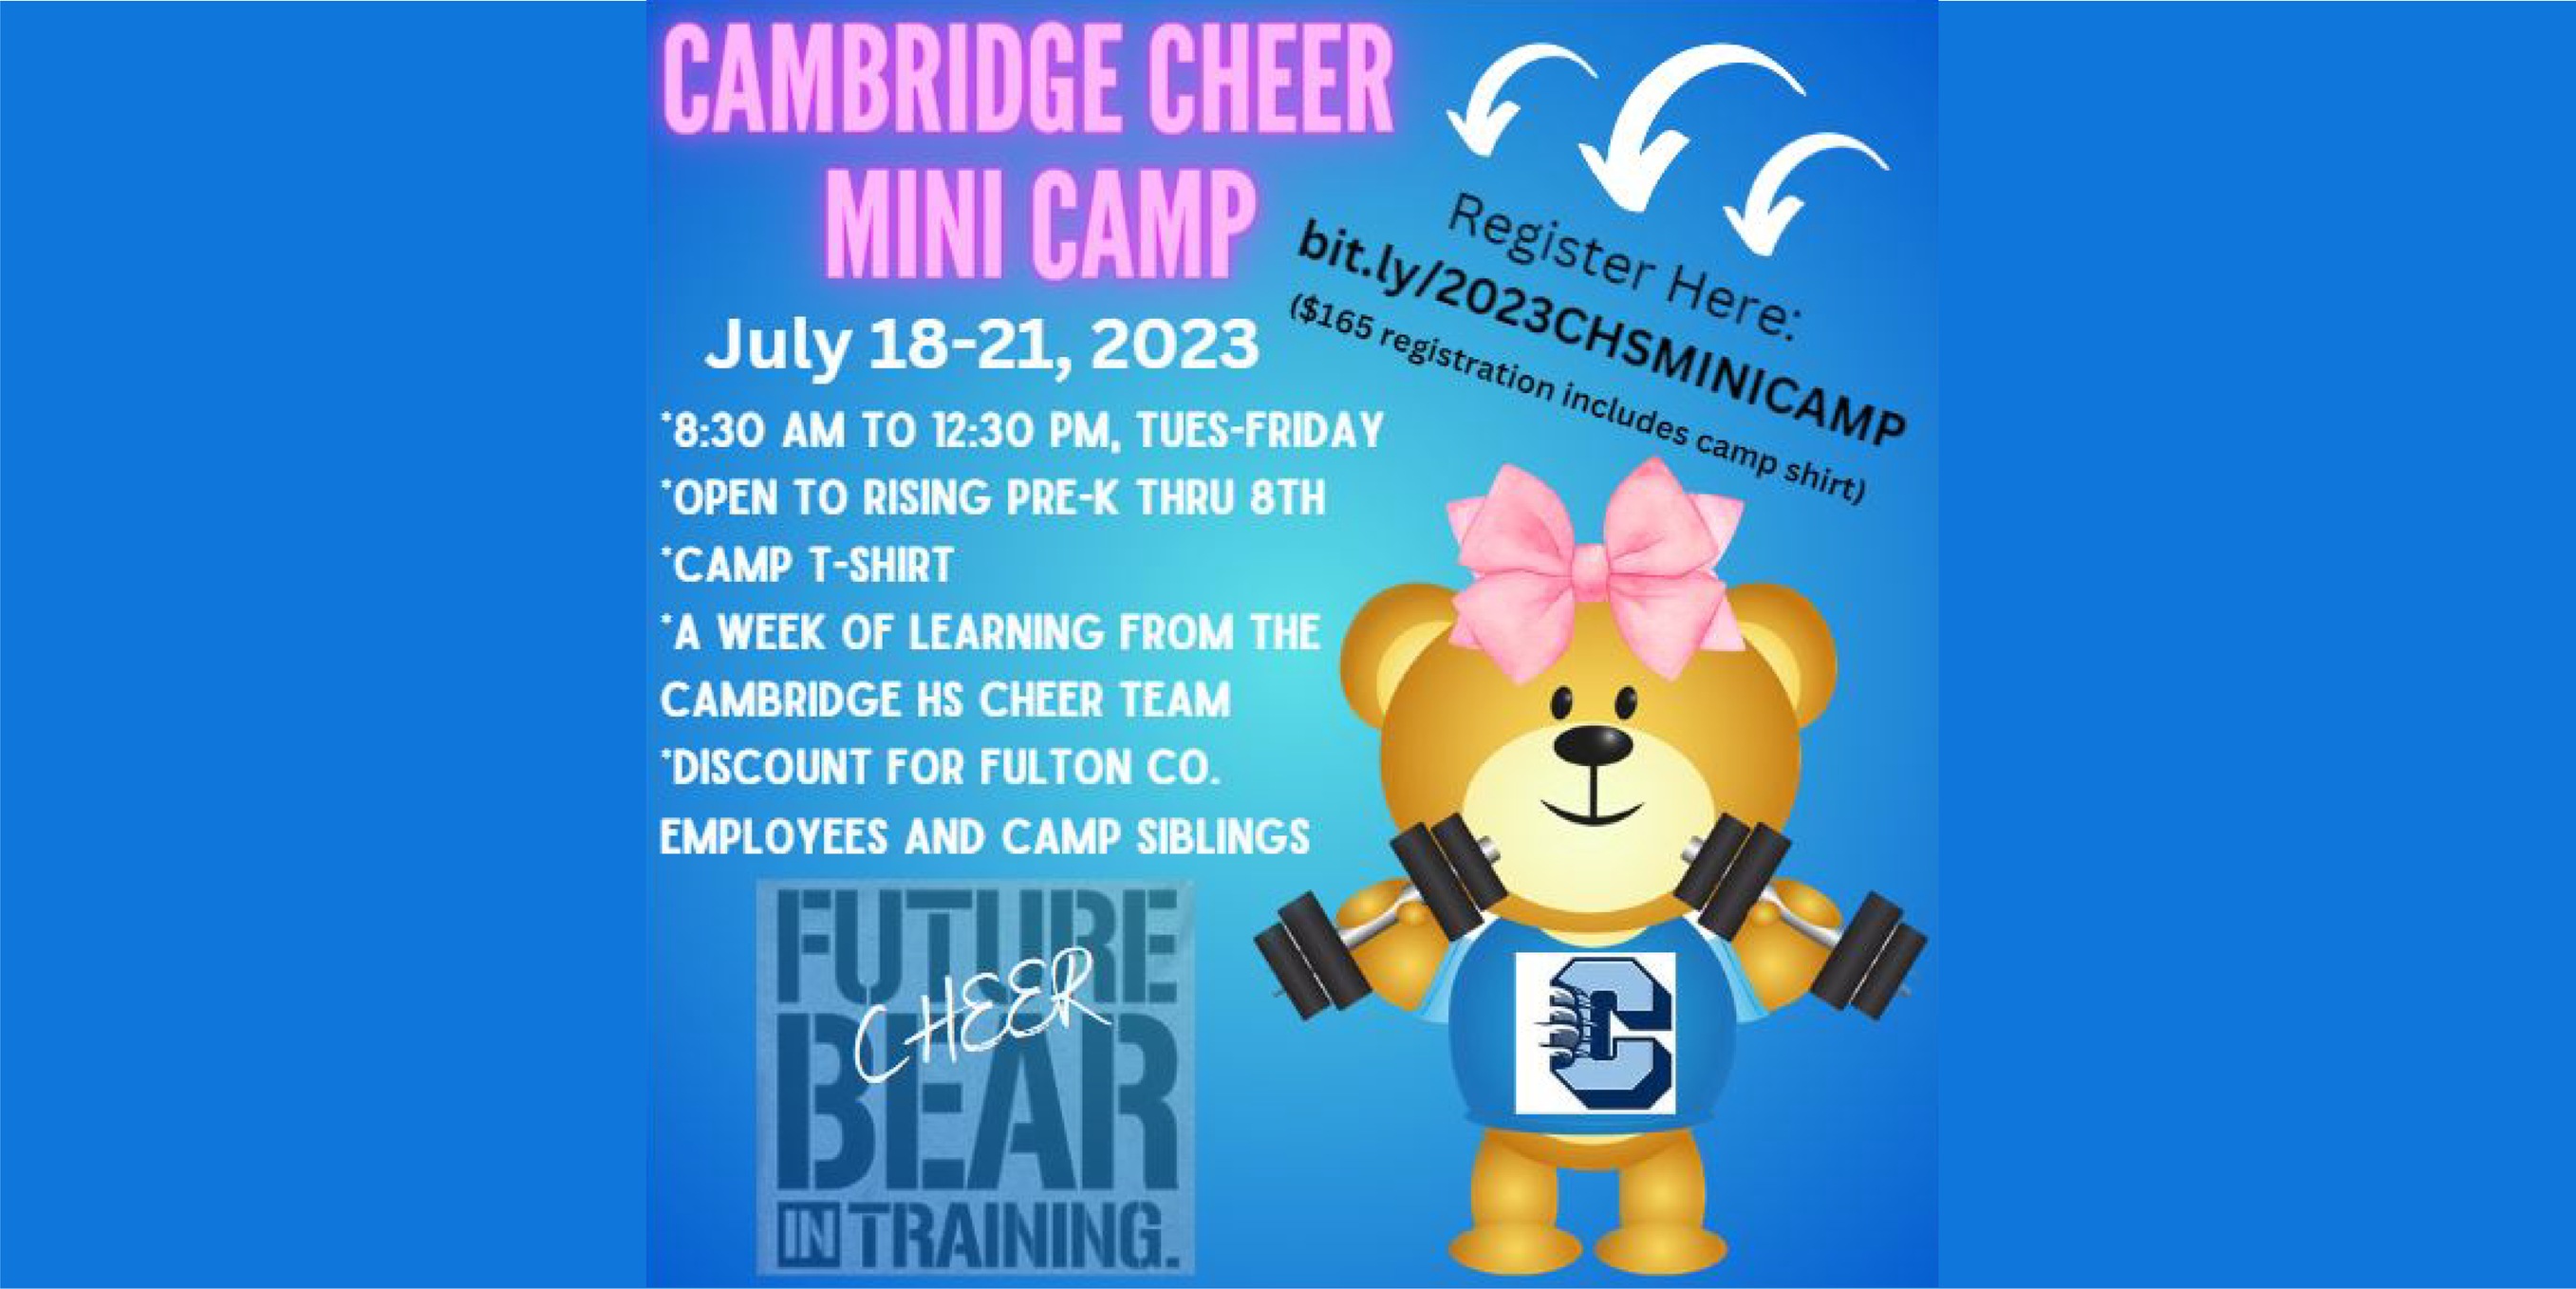 Registration Now Open for Cheer Mini Camp